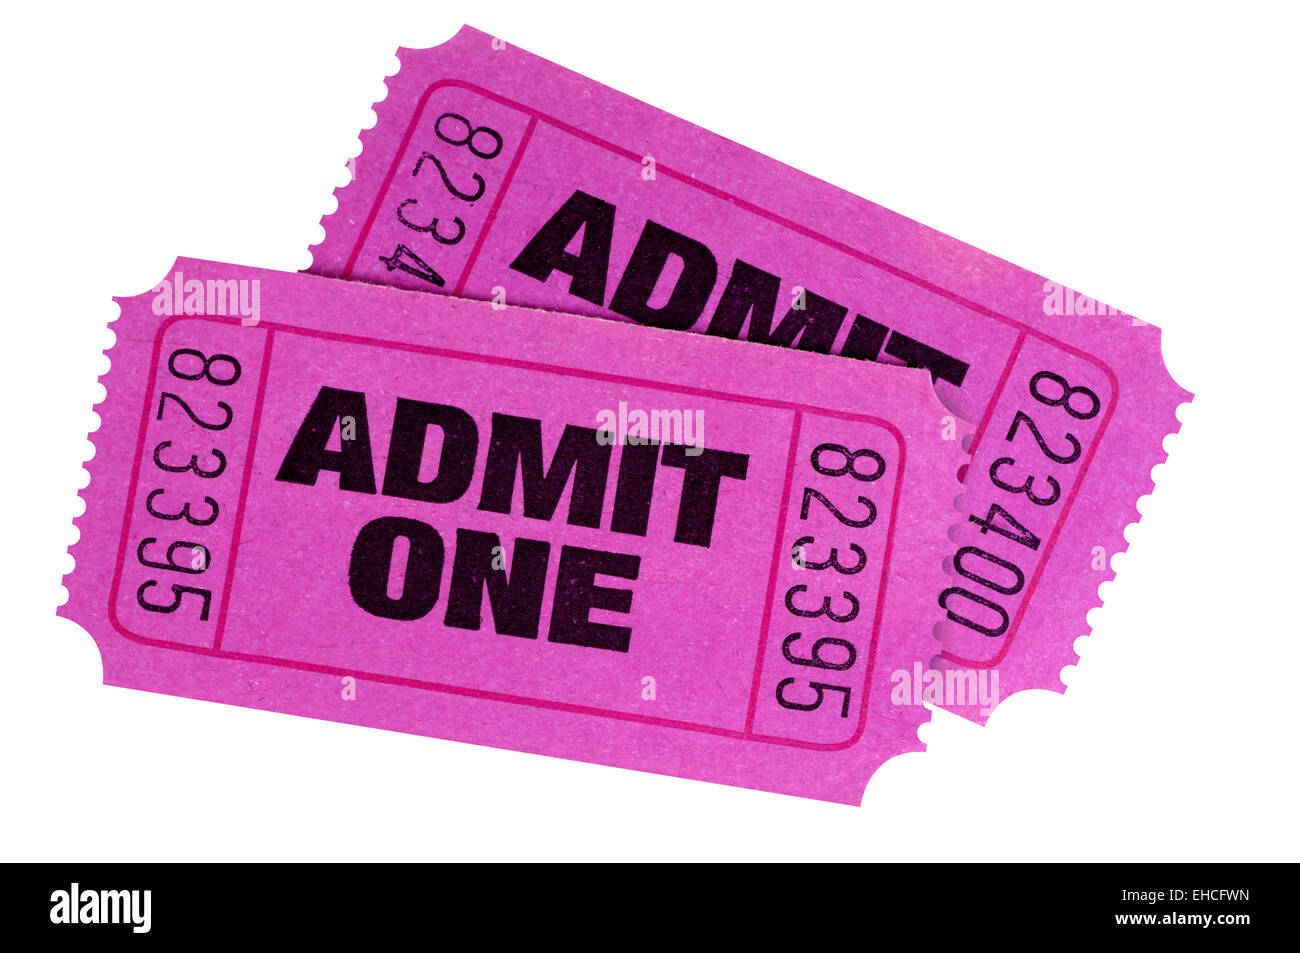 Two purple or pink movie tickets isolated on a white background. Stock Photo